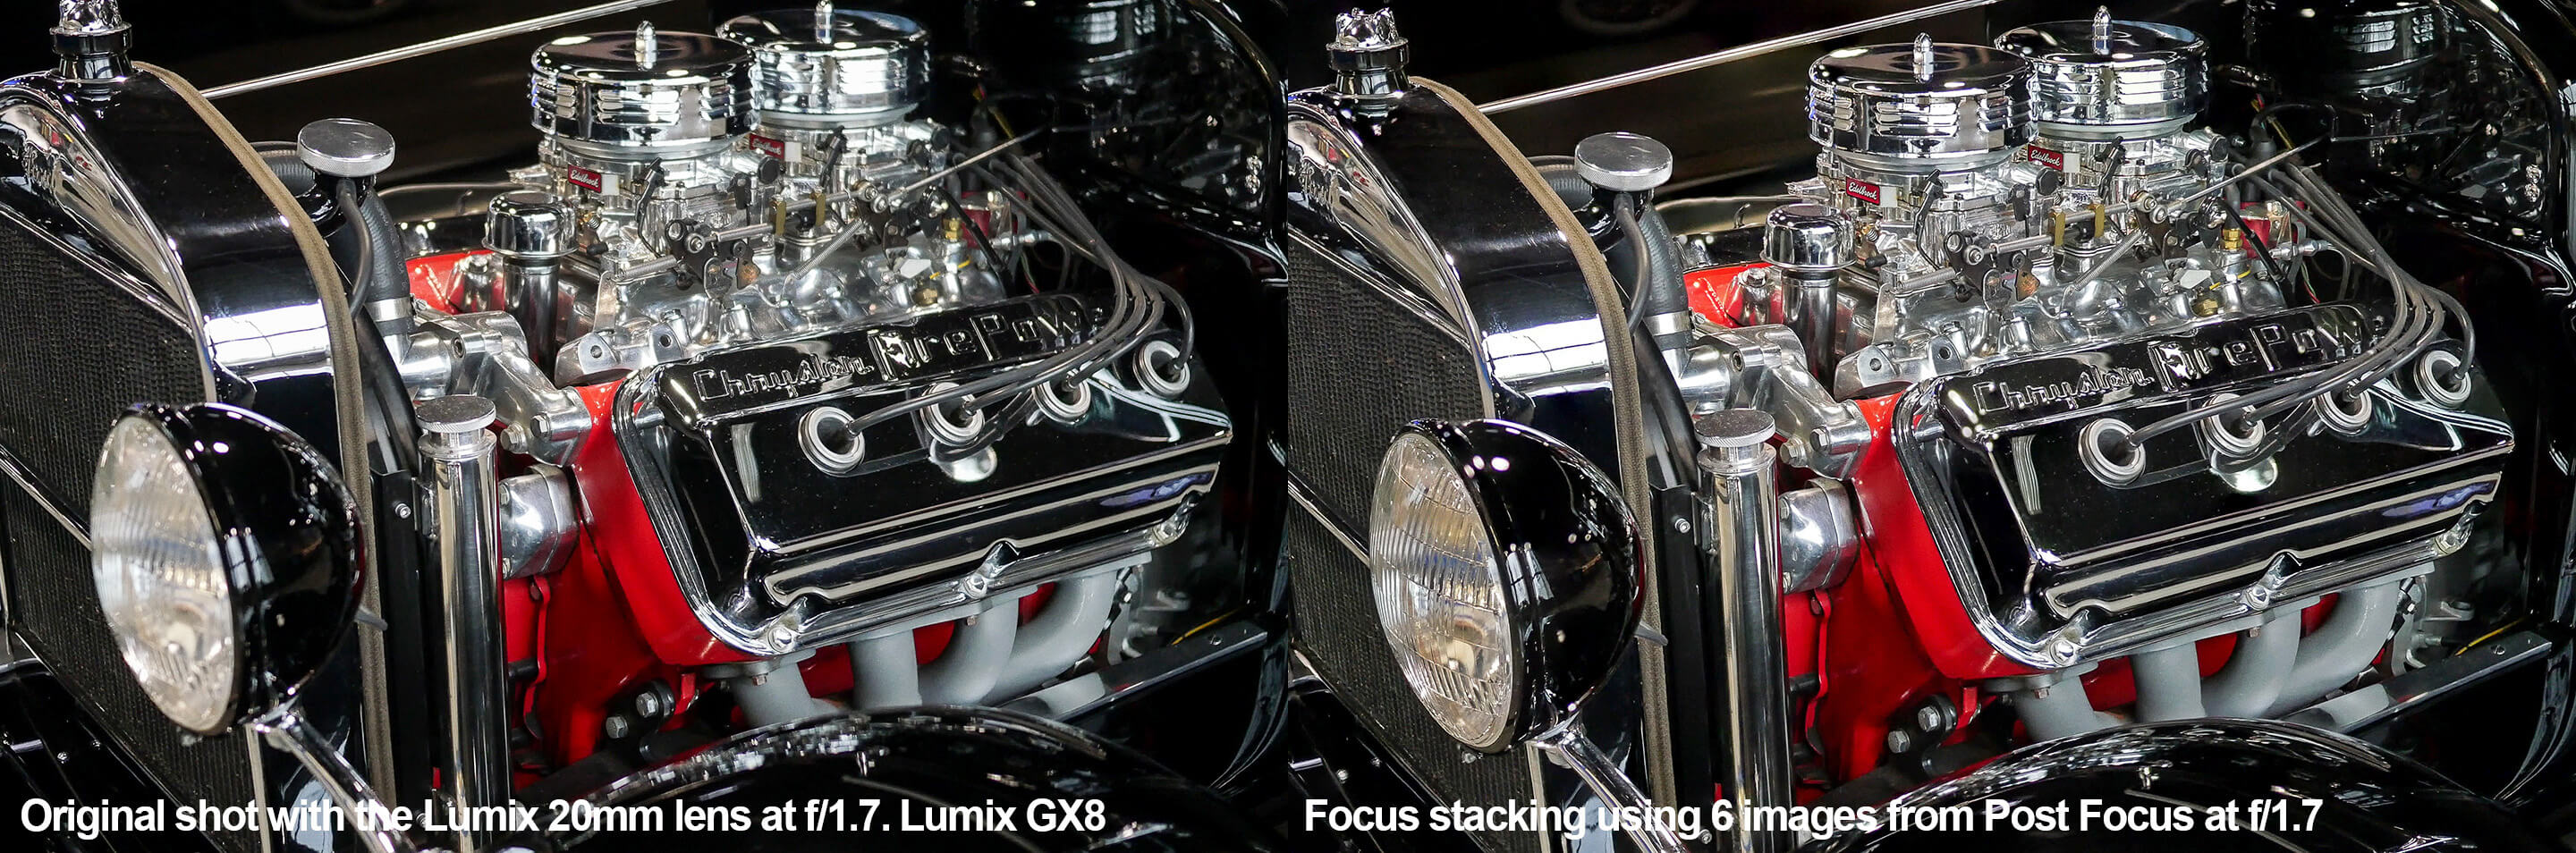 Car engine before and after